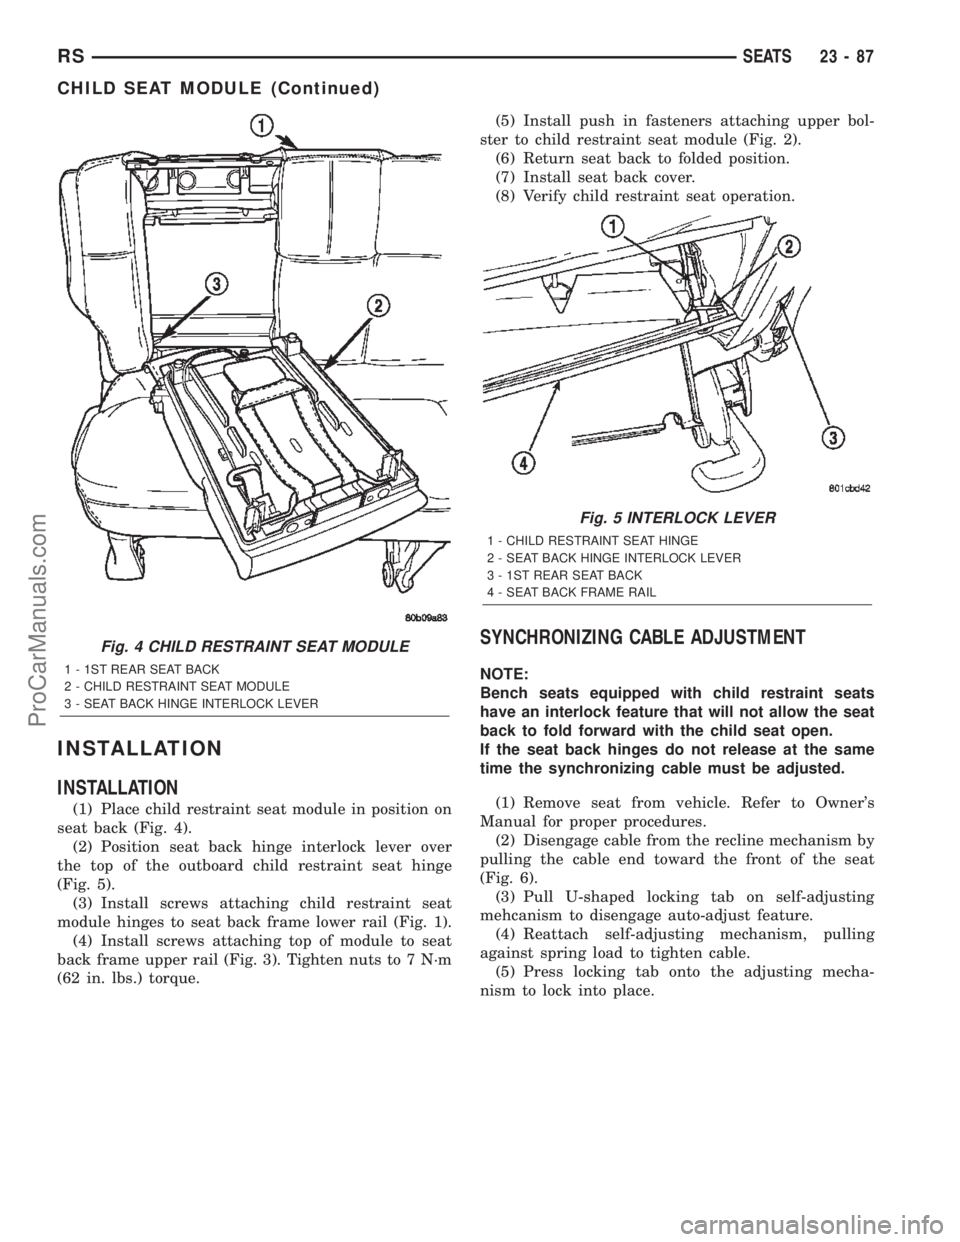 CHRYSLER VOYAGER 2002  Service Manual INSTALLATION
INSTALLATION
(1) Place child restraint seat module in position on
seat back (Fig. 4).
(2) Position seat back hinge interlock lever over
the top of the outboard child restraint seat hinge
